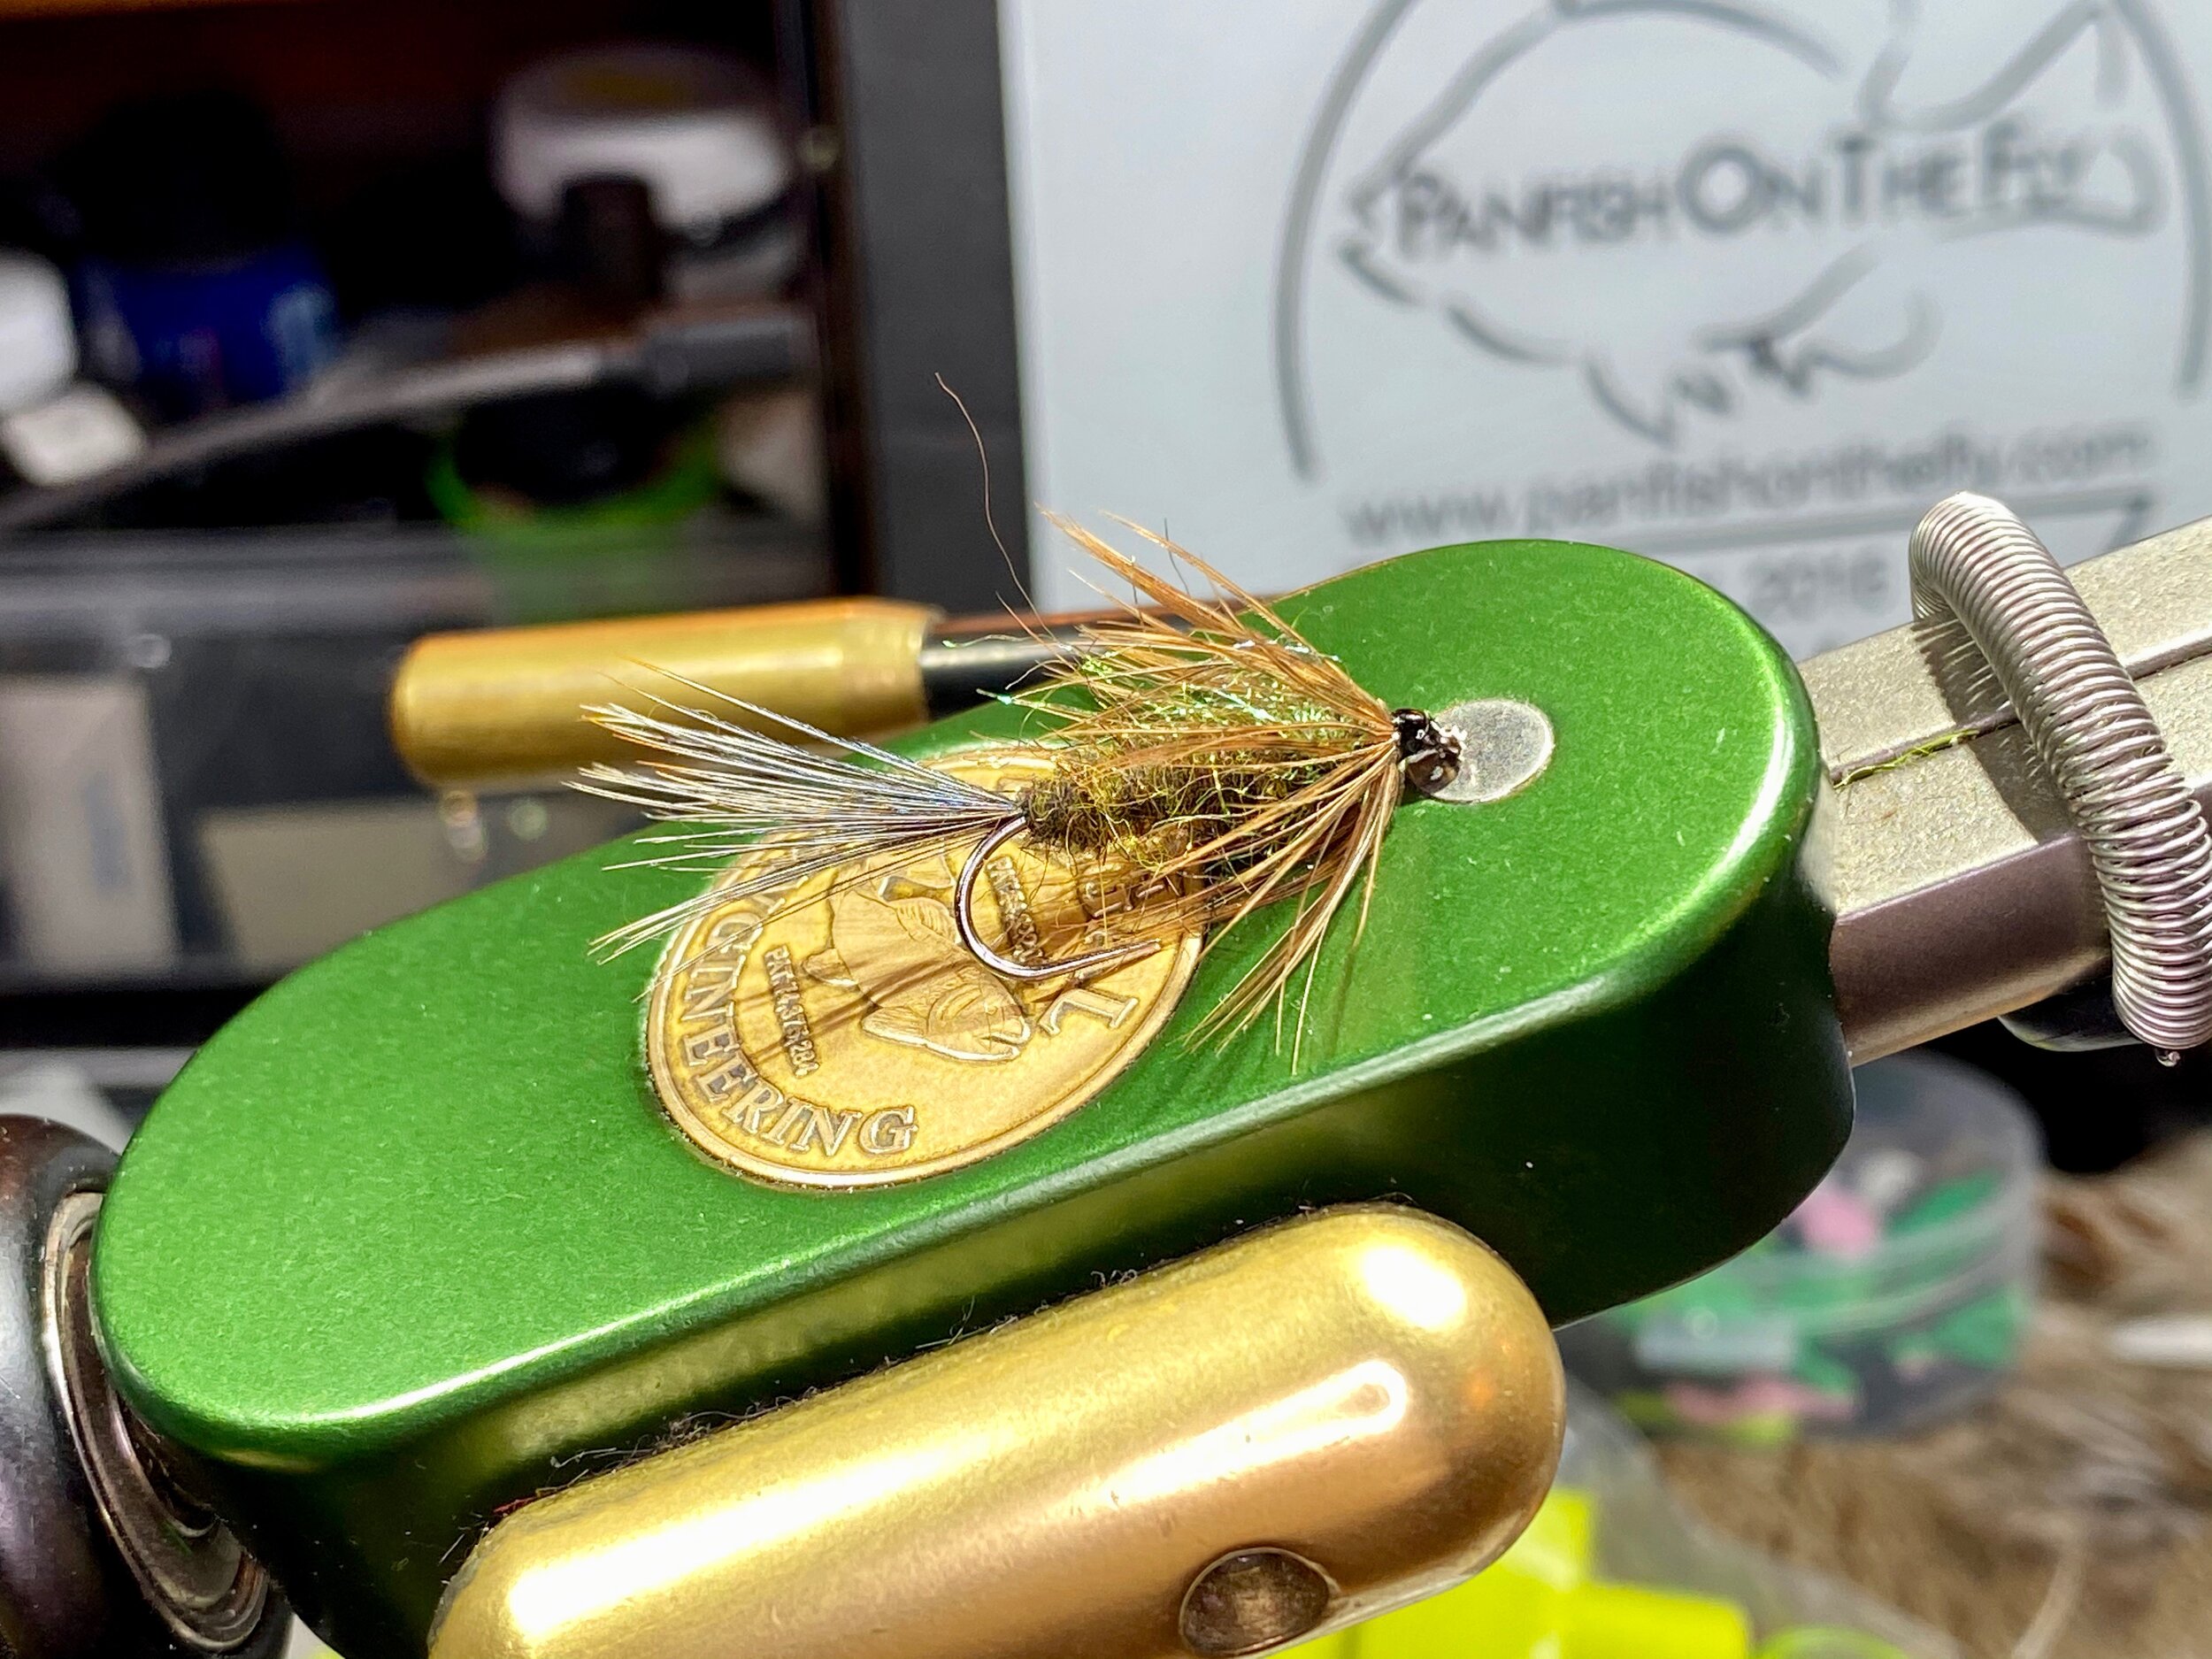 Double Duty Nymphs for Panfish and Bass — Panfish On The Fly